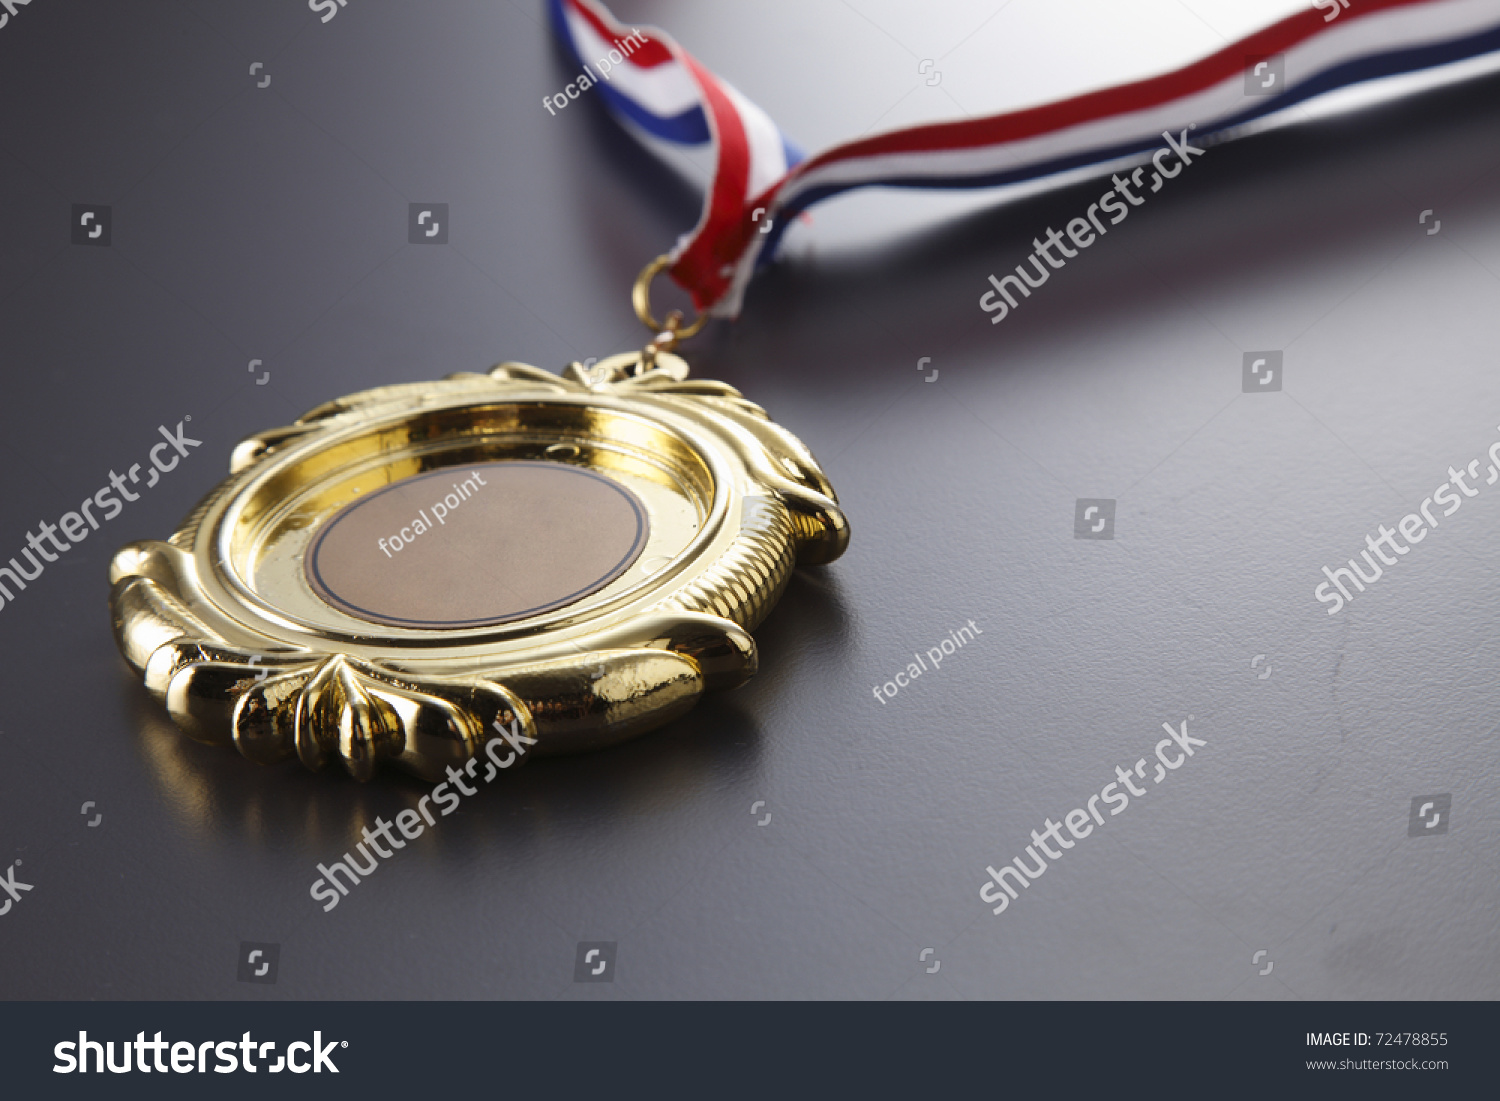 powerpoint-template-award-gold-medal-isolated-ojloppmm